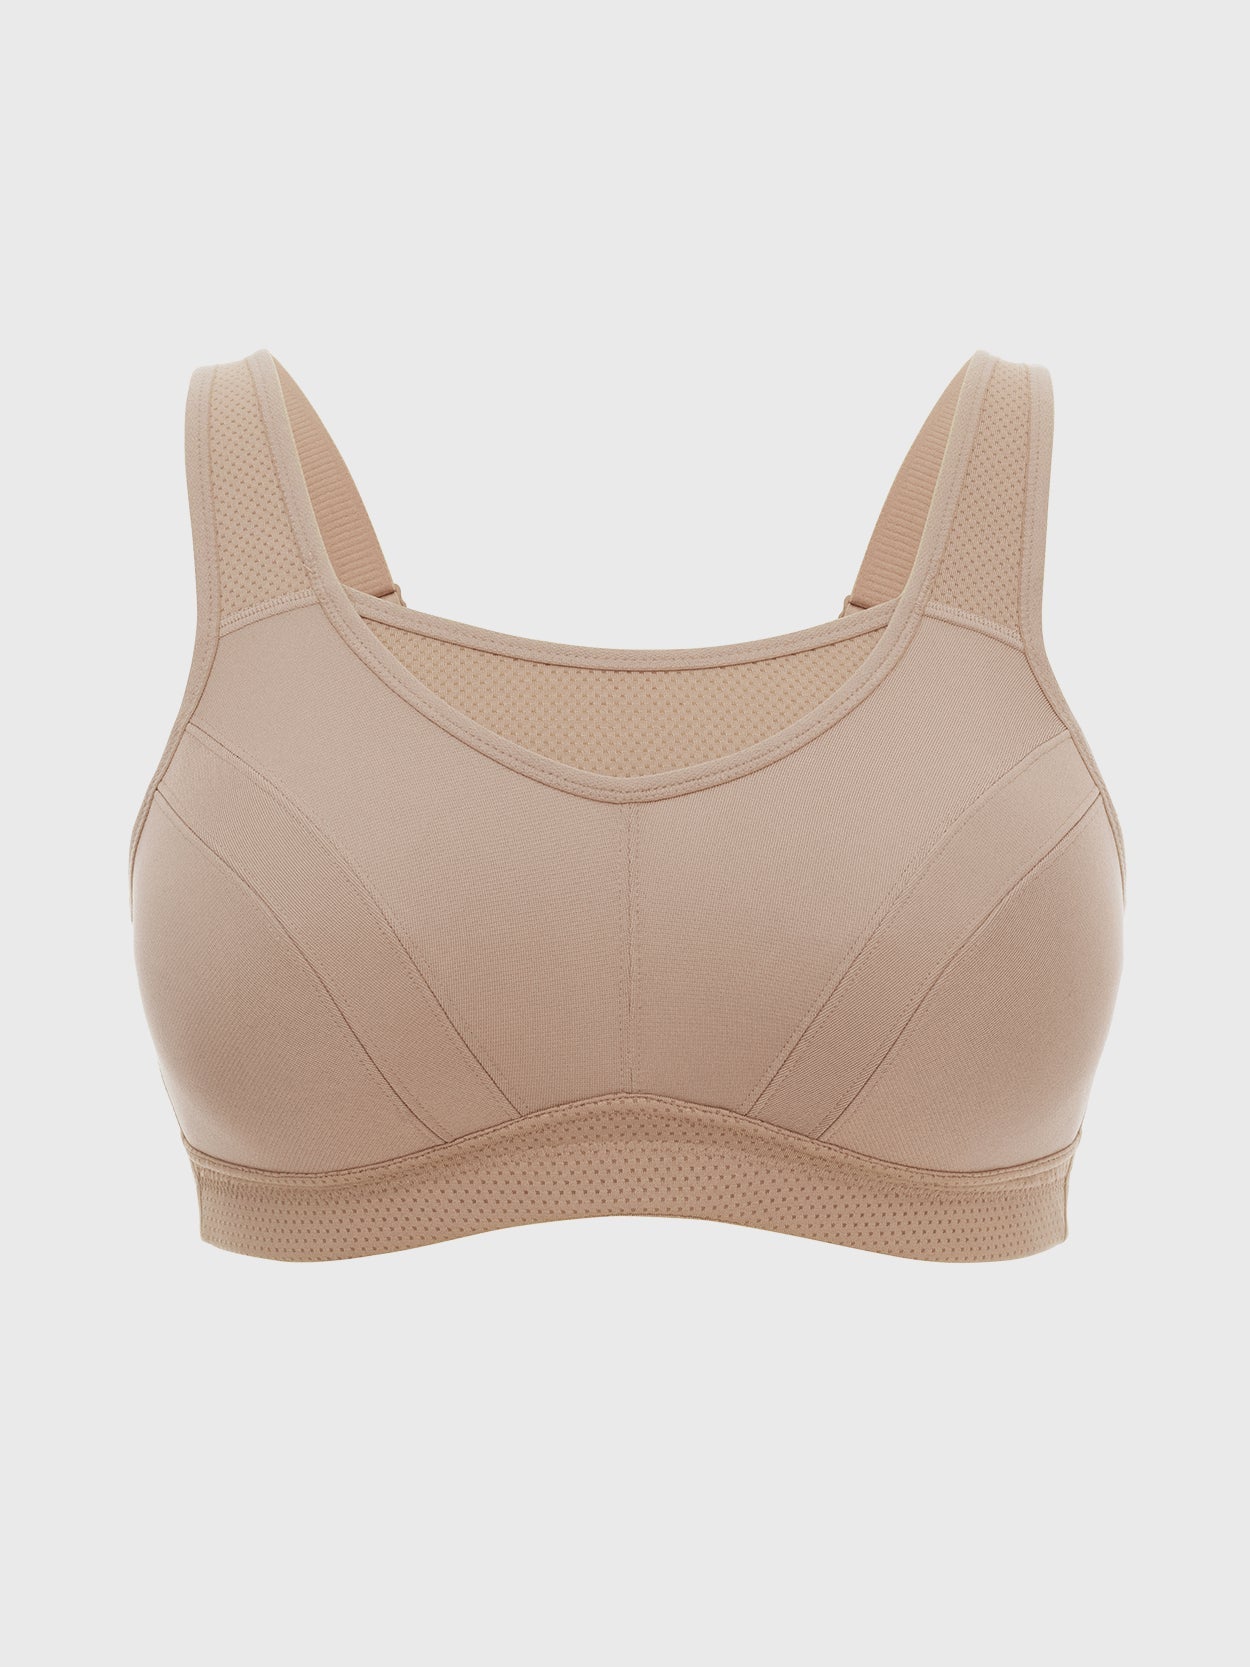 Wingslove Women's High Support Sports Bra Plus Size High Impact Wireless  Full Coverage Non Padded Bounce Control, Beige 48DD 